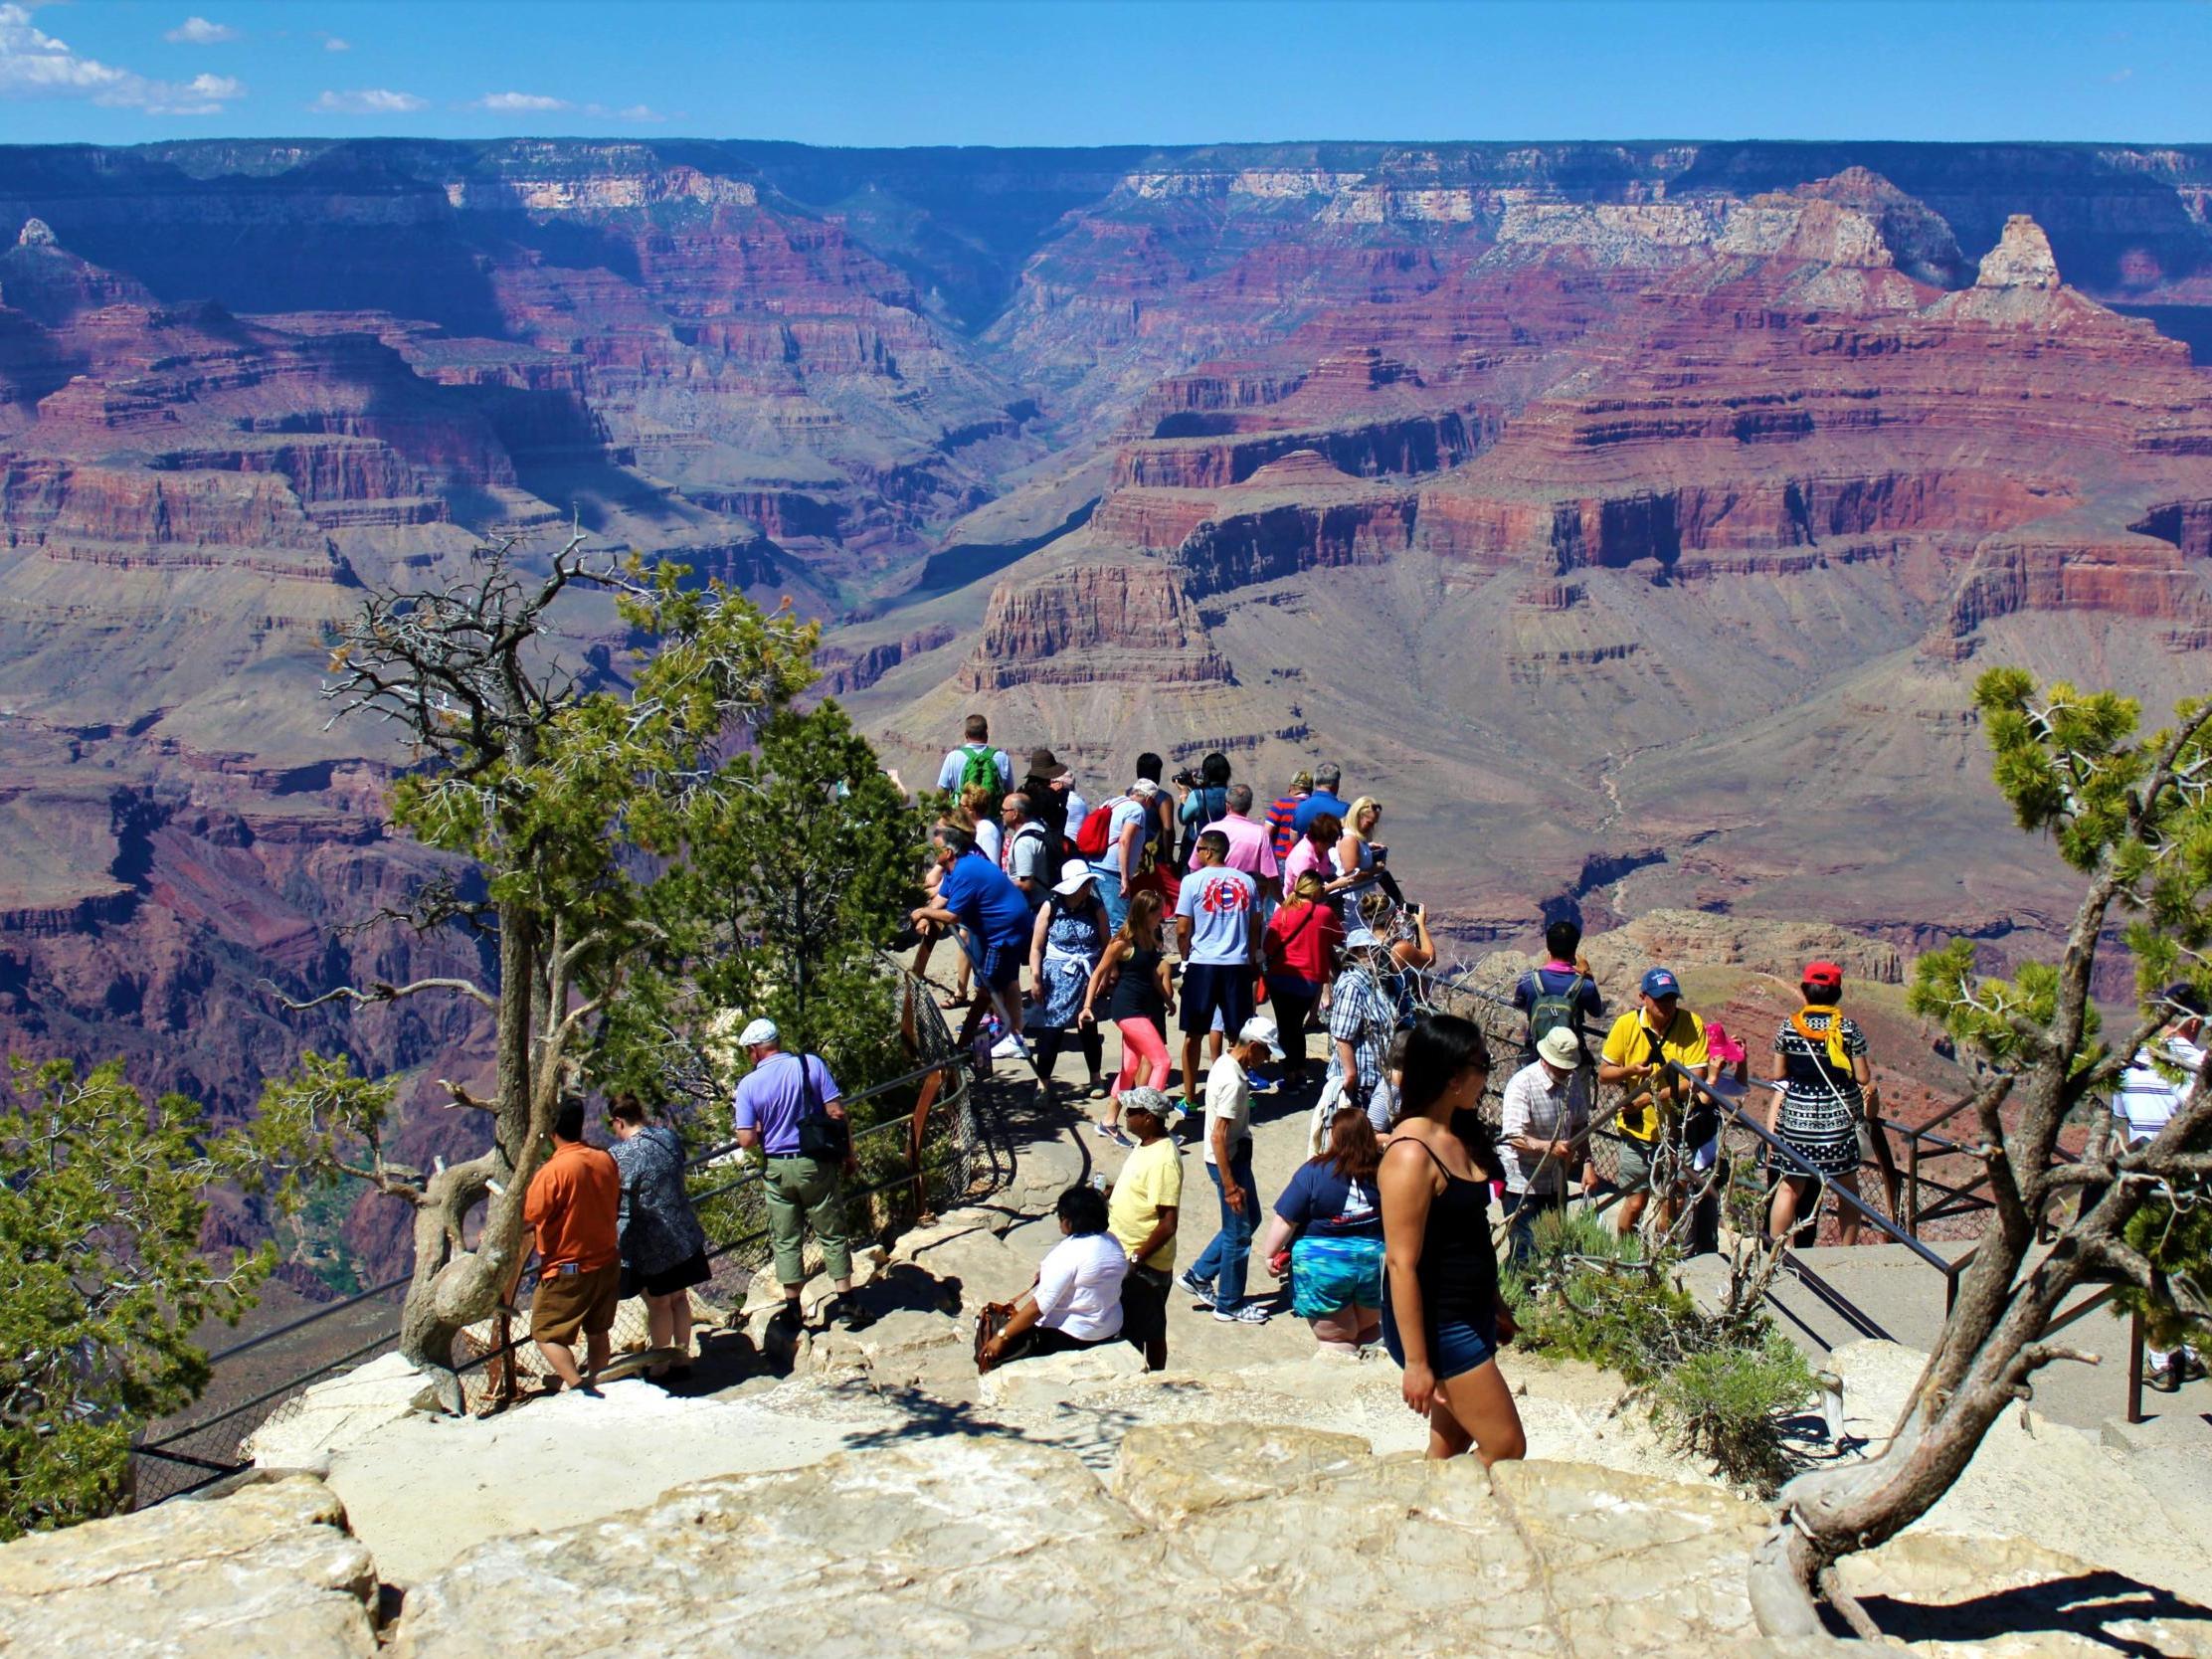 Woman falls to her death while taking photos at Grand Canyon